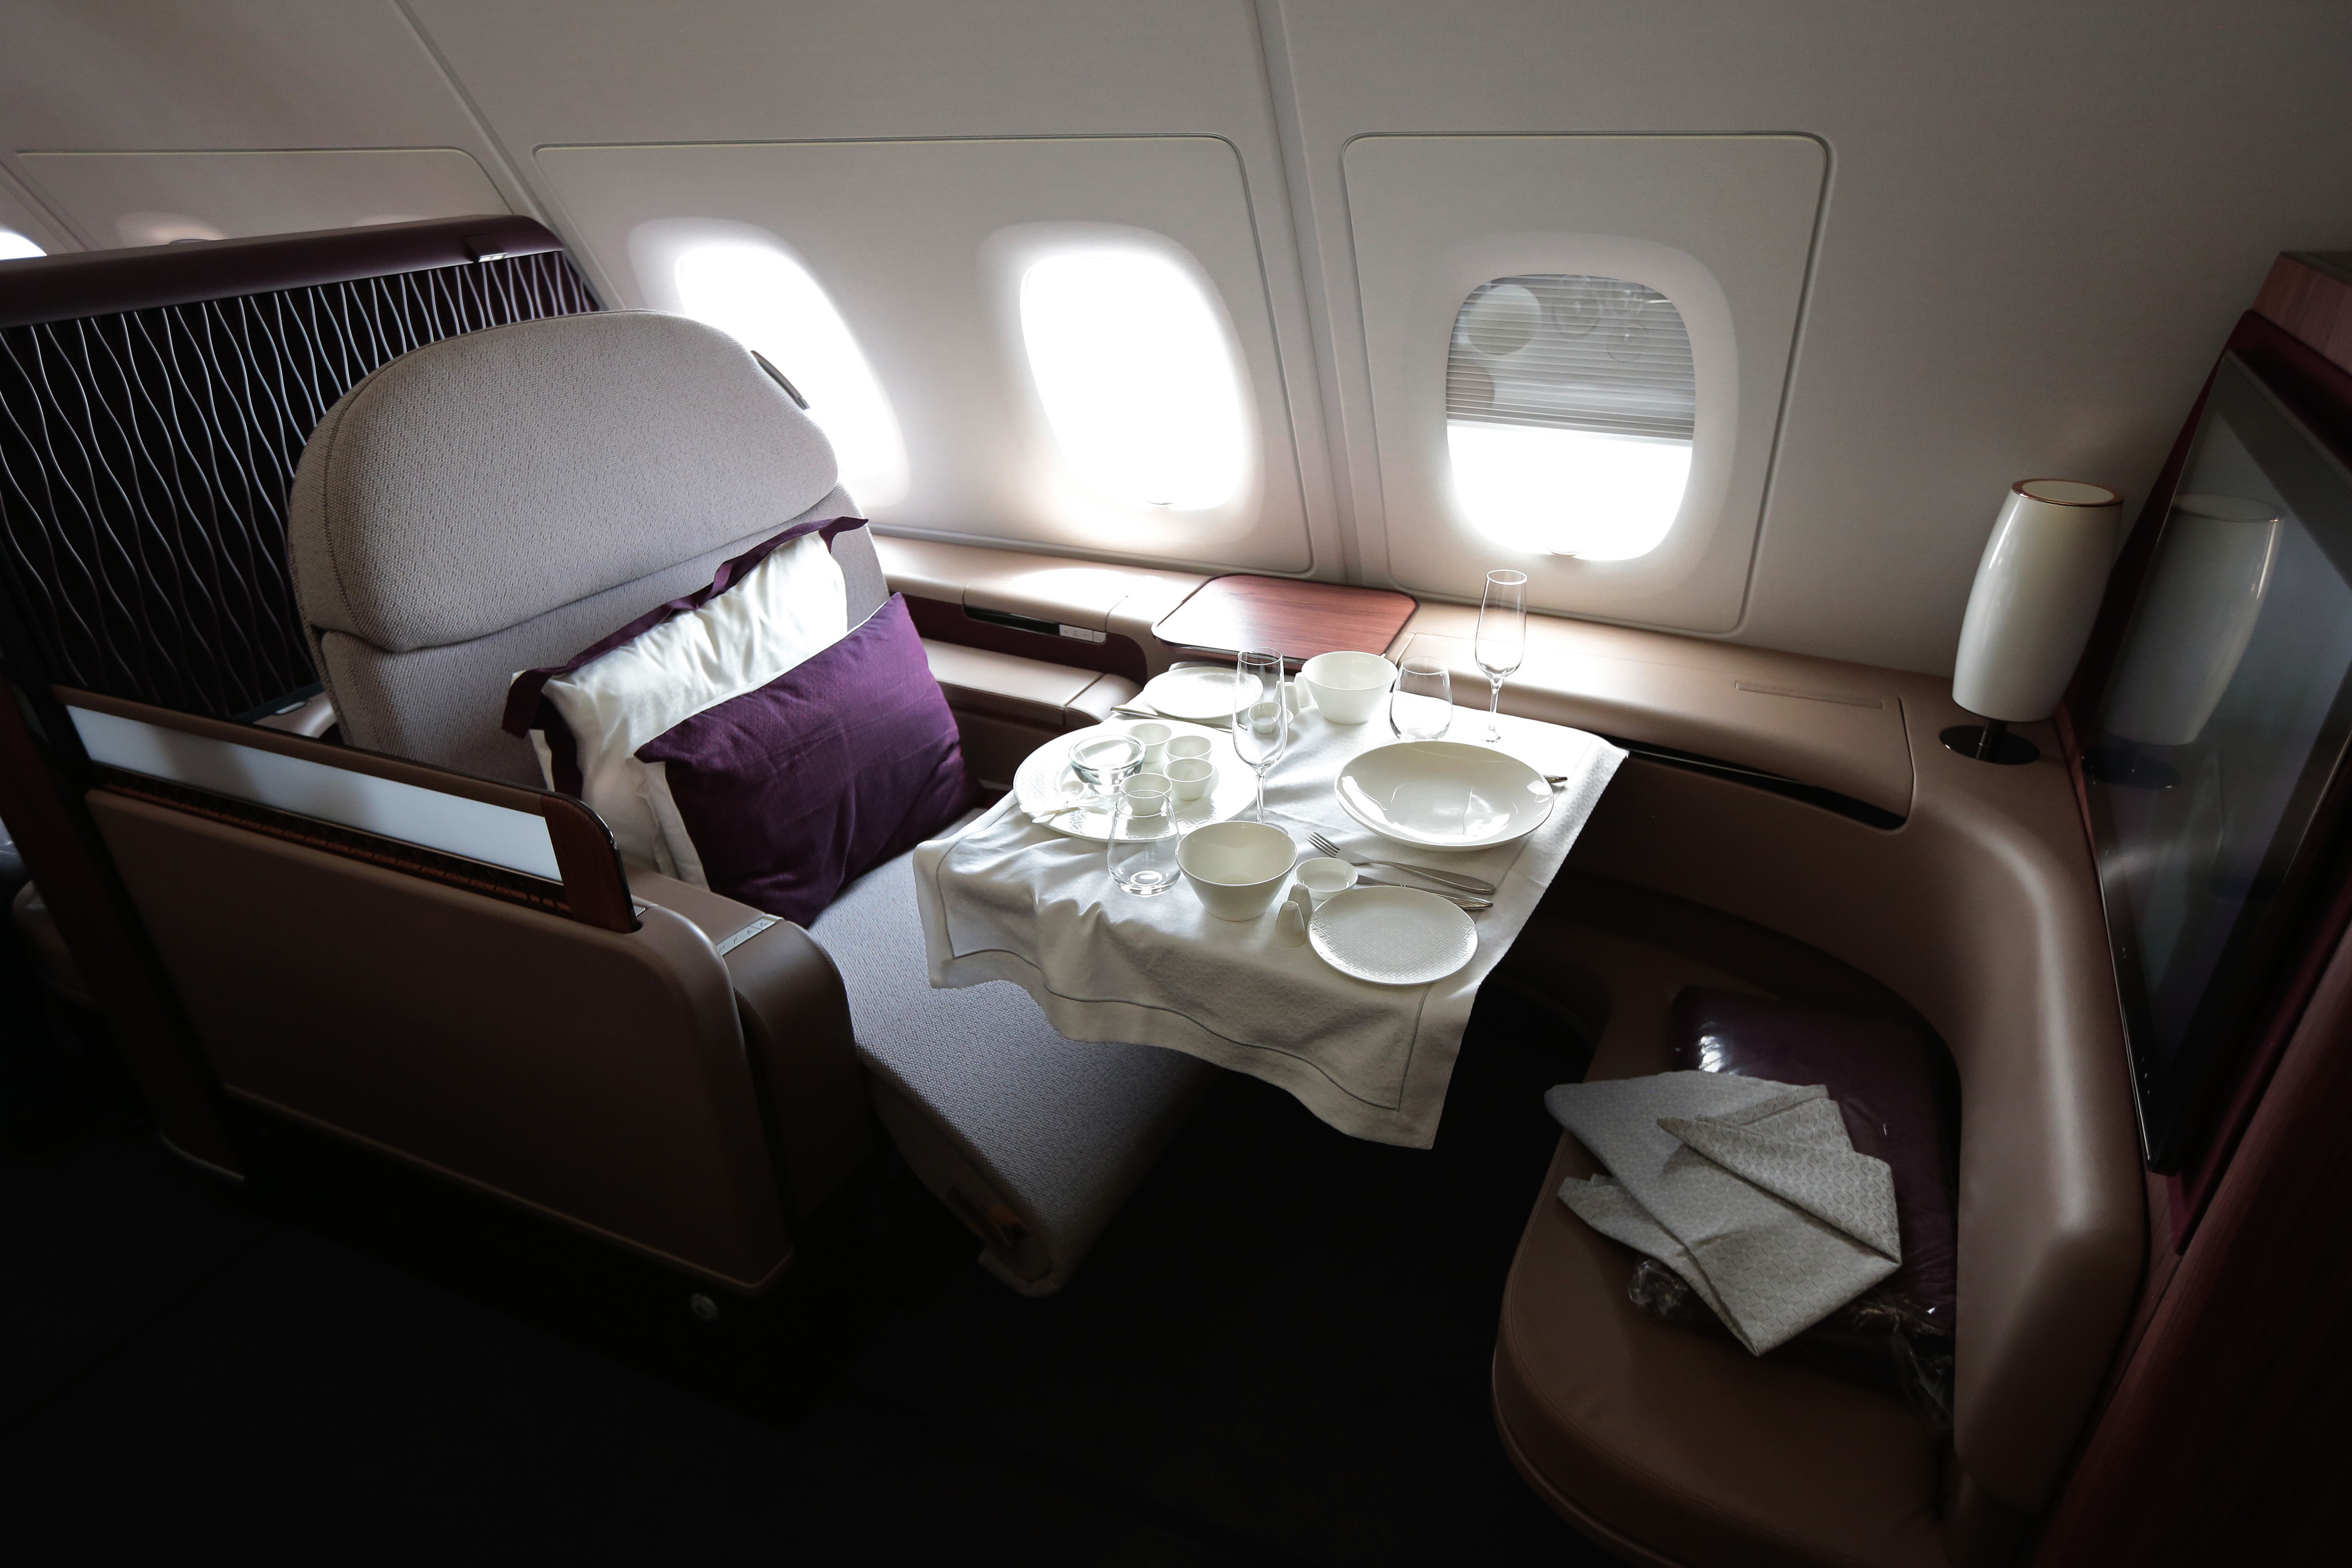 For its business and first-class passengers, Qatar Airways has